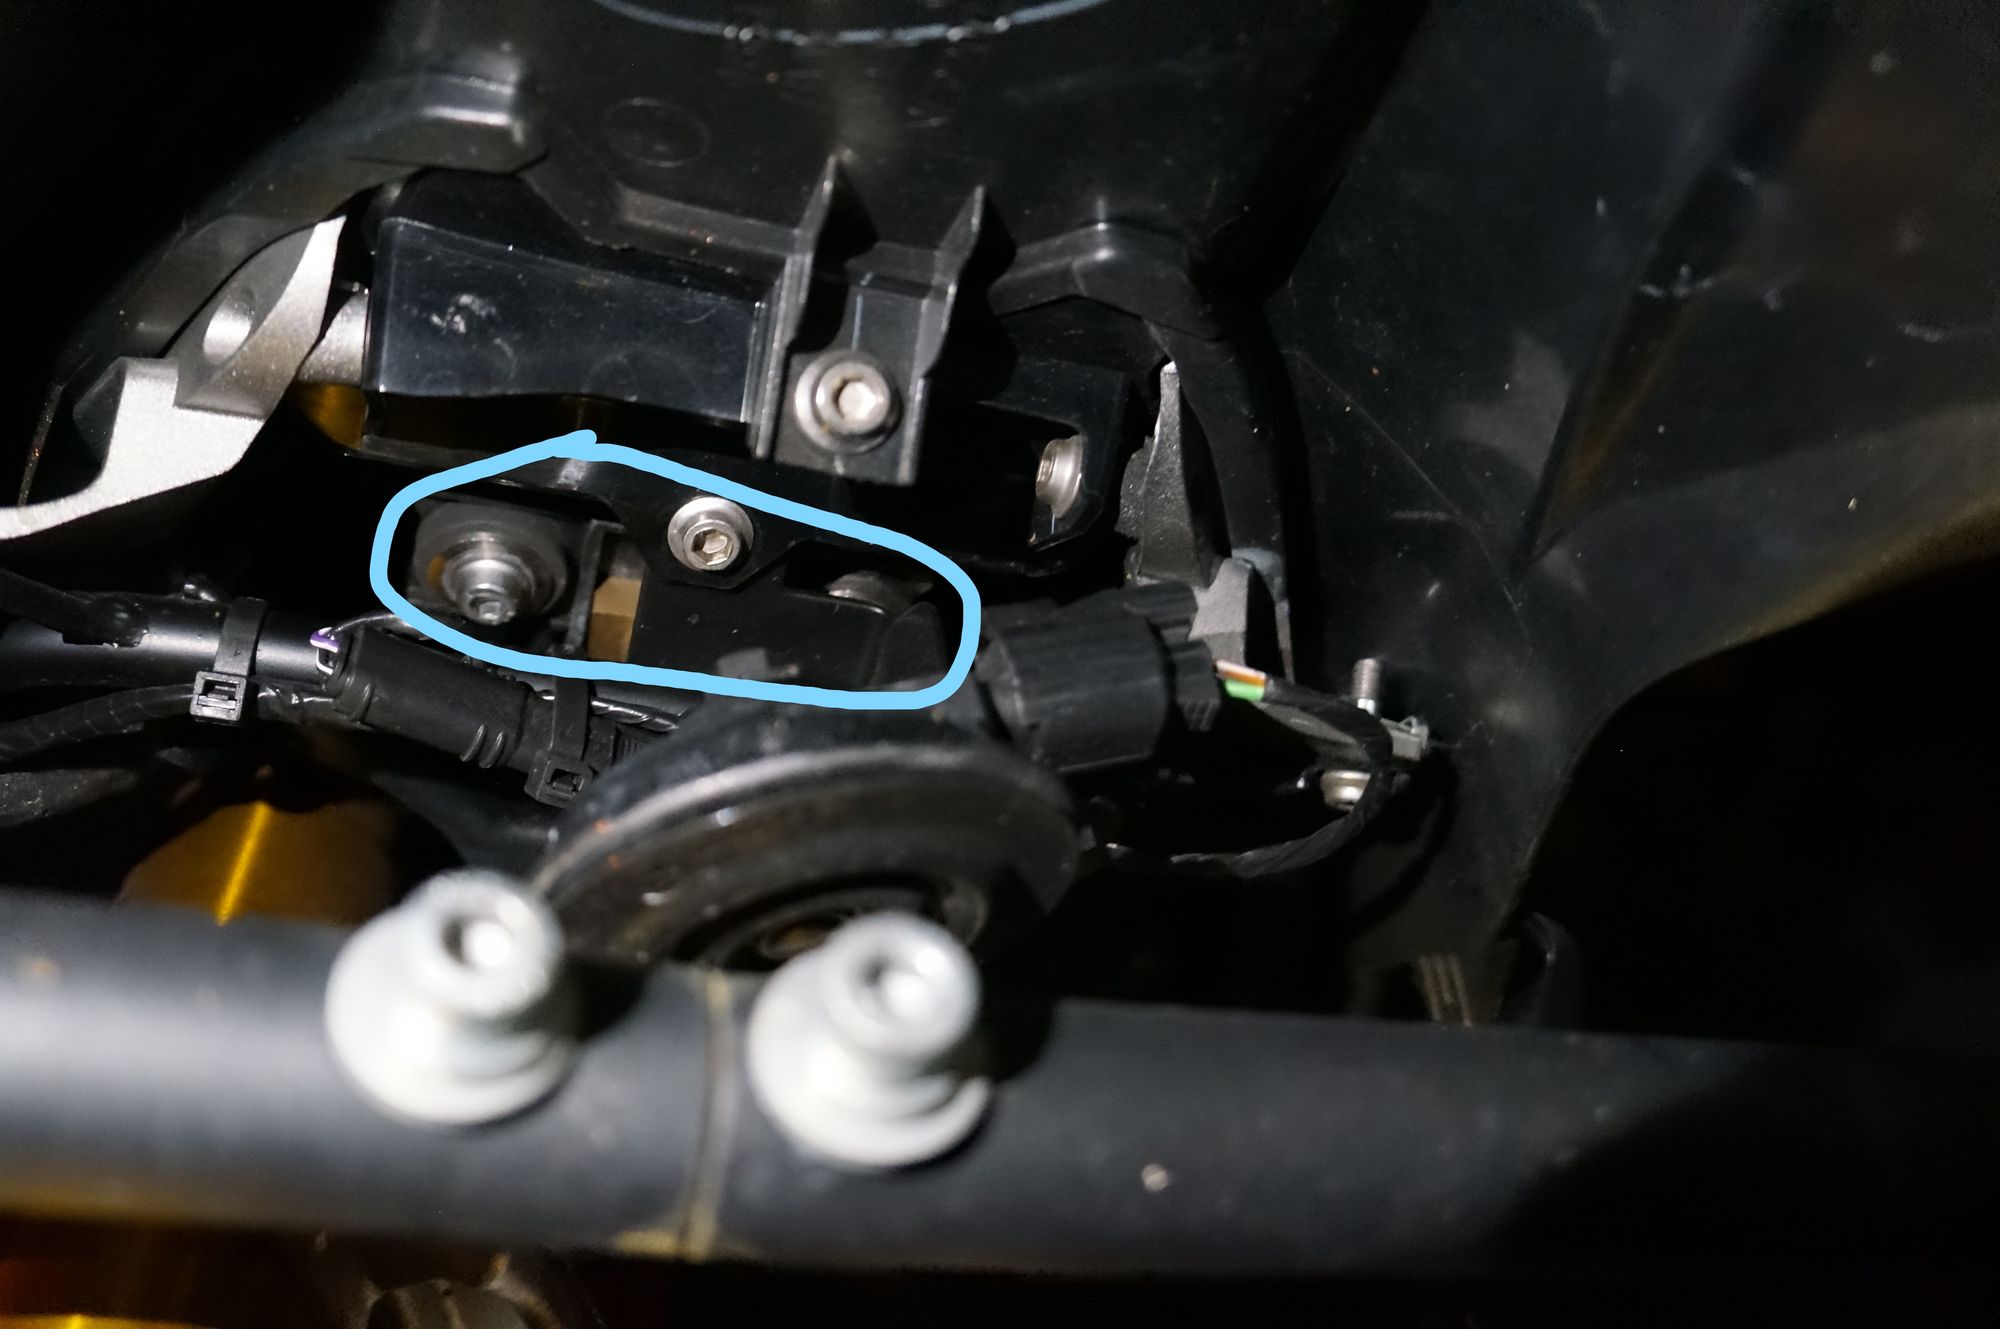 Where and How to Use the Accessory Port on a 2017+ BMW G310 GS